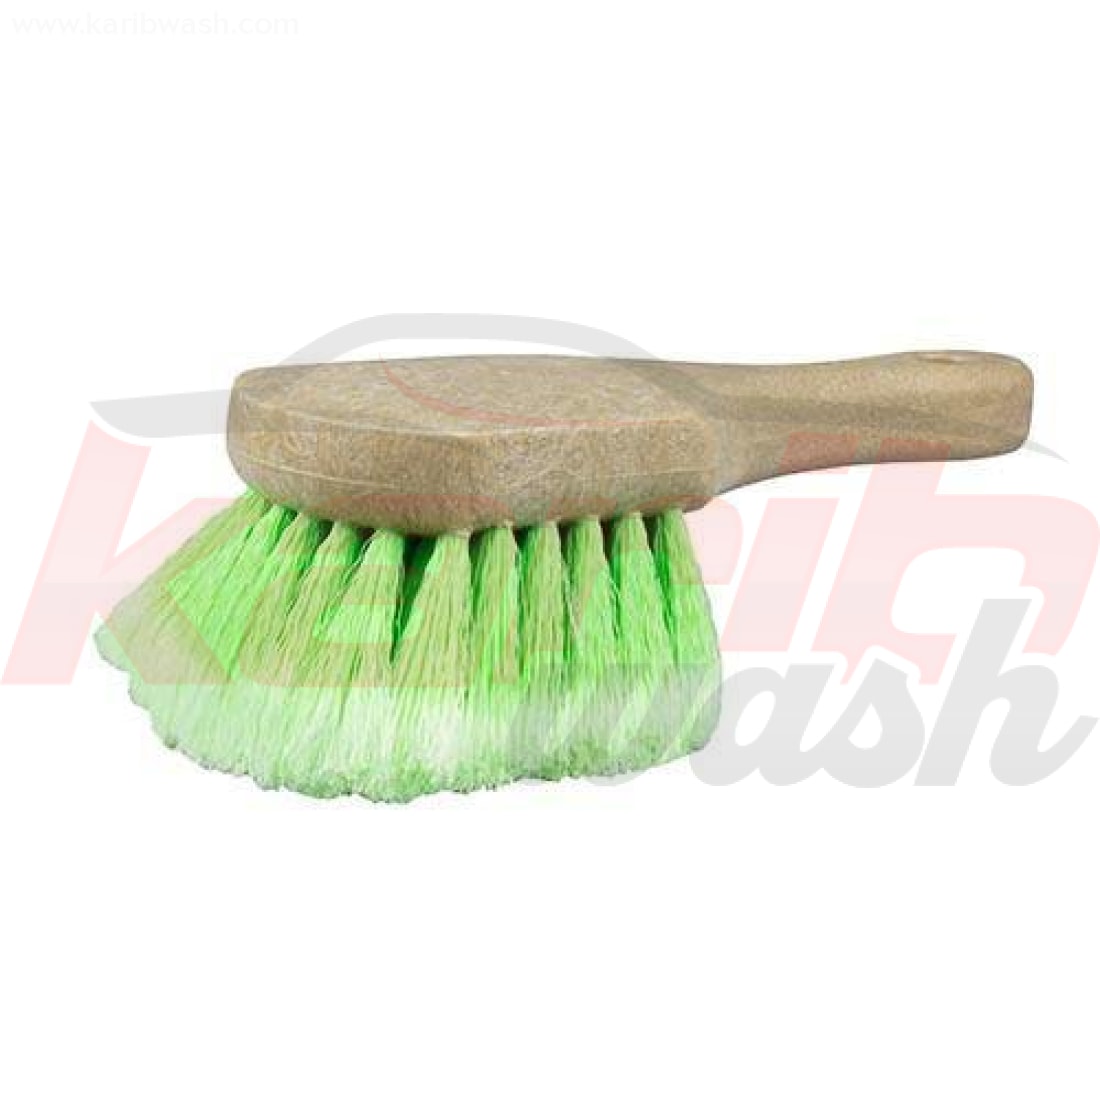 Tire/Wheel Brush- Heavy Cleaning With Gentle Feathered Bristles Short Handle Green Bristles - CHEMICAL GUYS - KARIBWASH